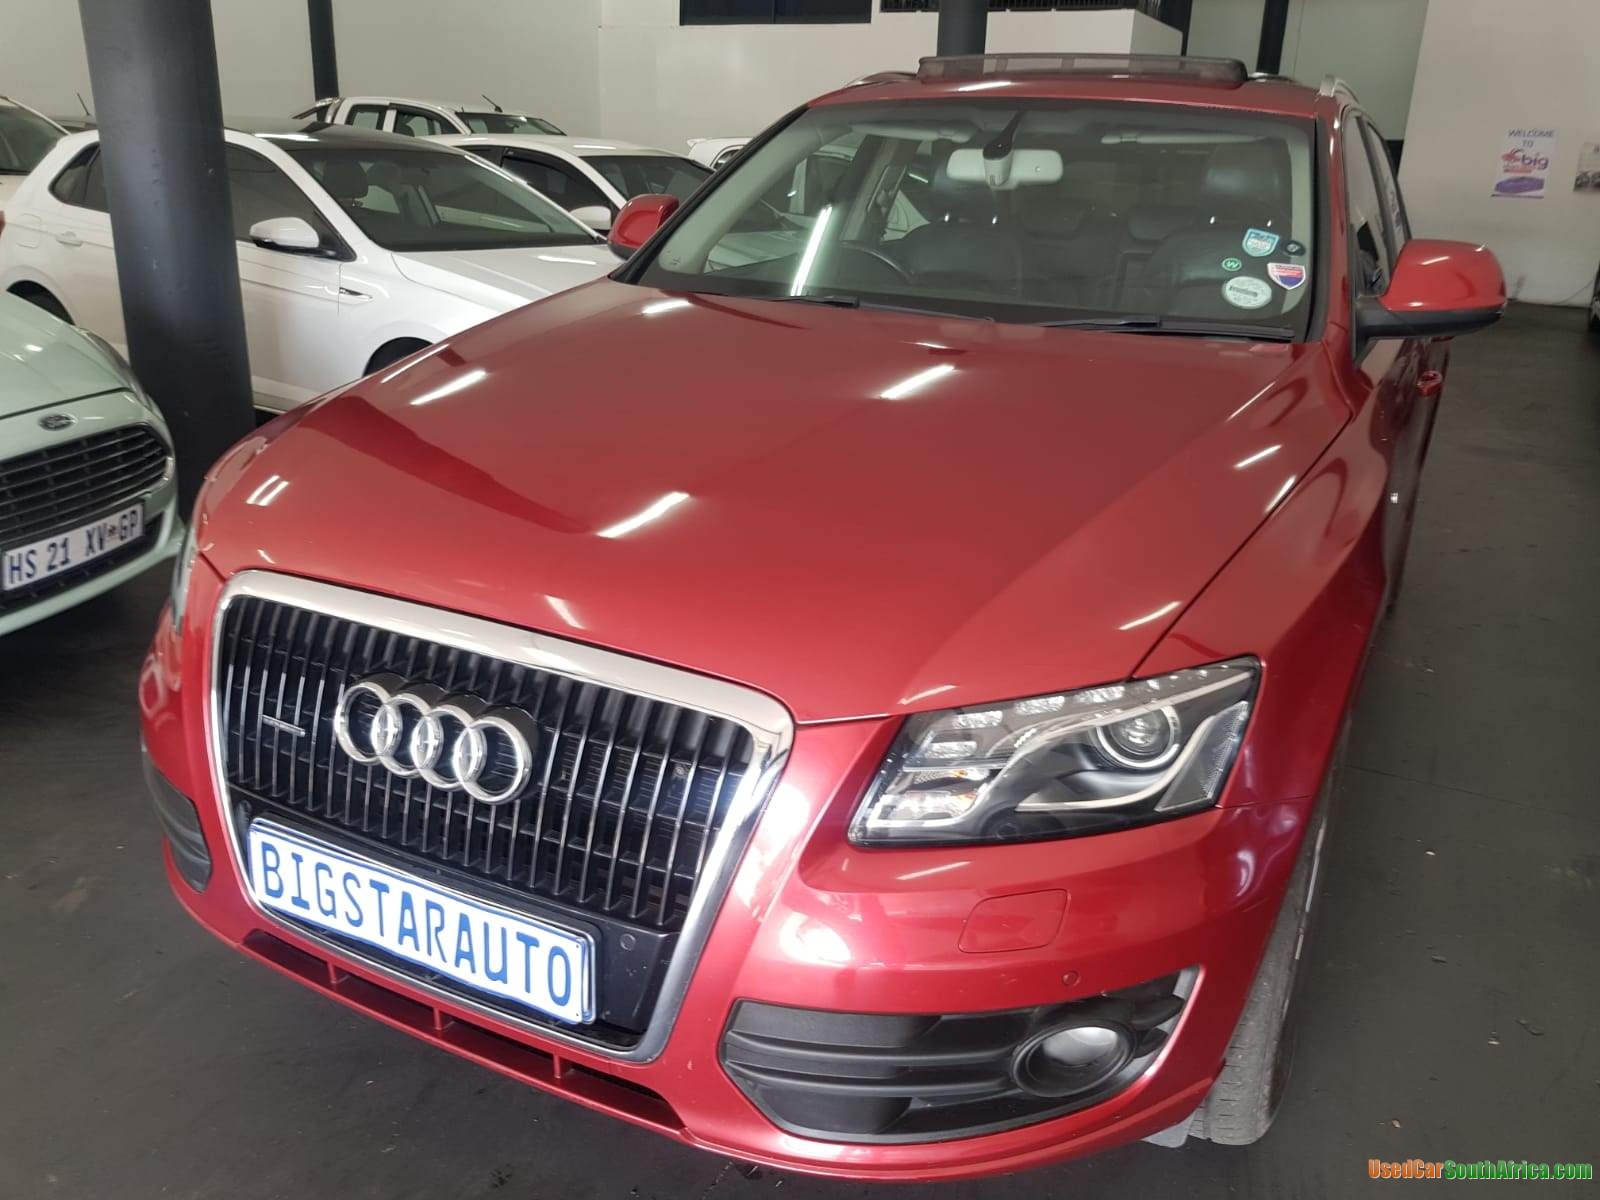 2013 Audi Q5 2.0TDI used car for sale in Johannesburg City Gauteng South Africa - OnlyCars.co.za